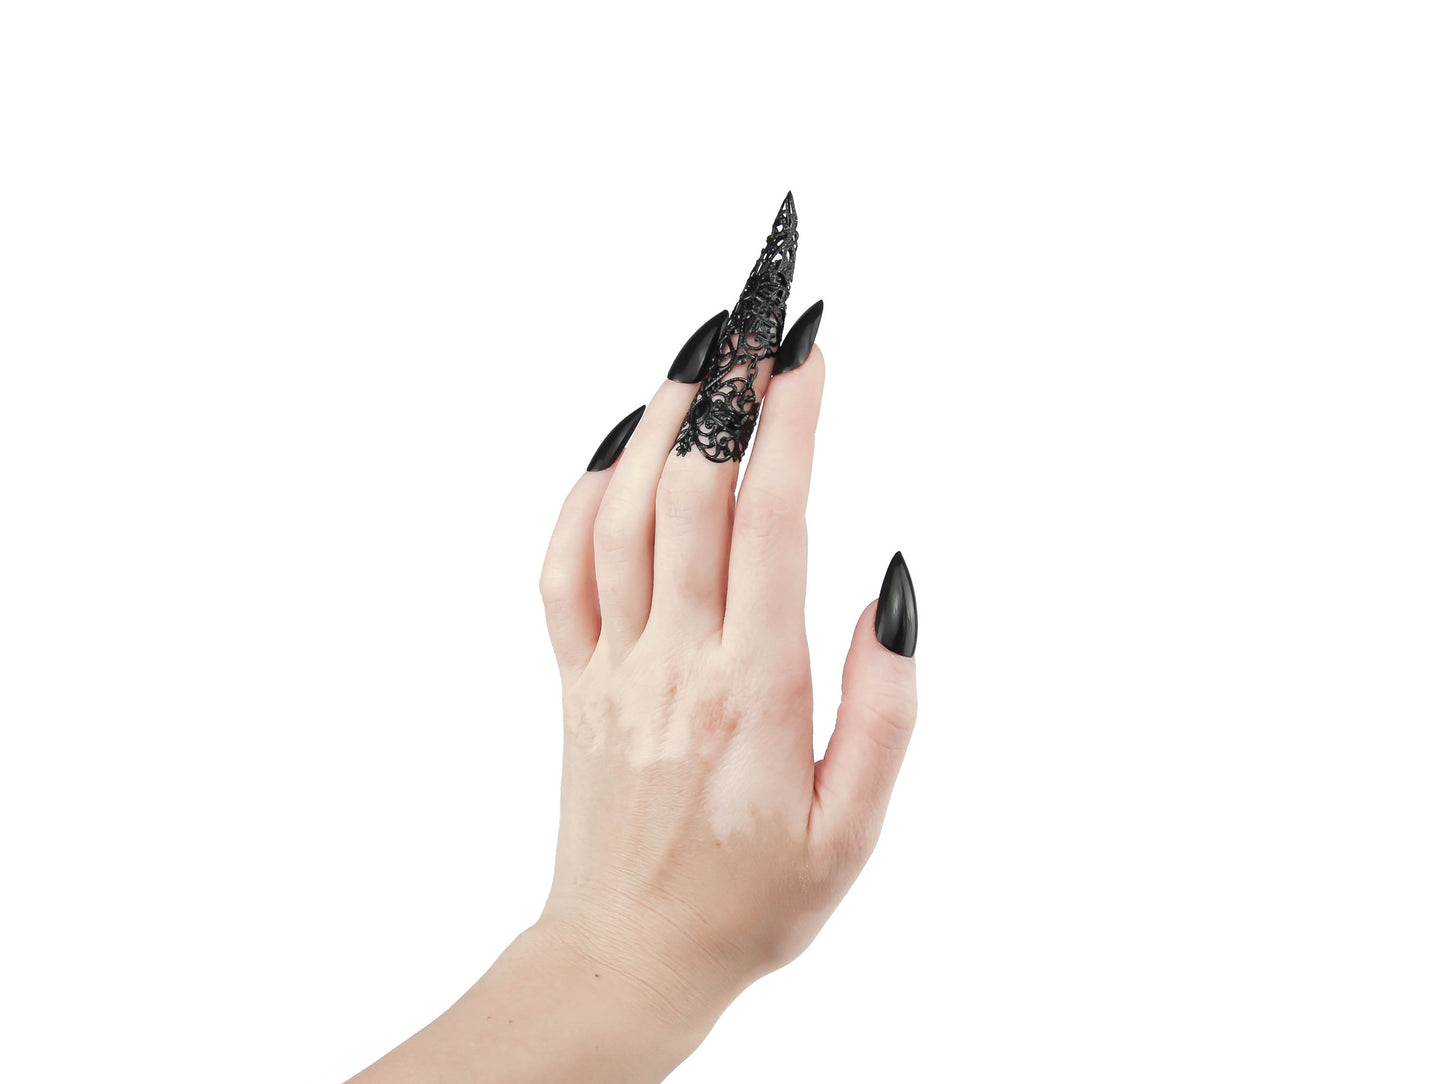 A hand adorned with a Myril Jewels claw ring on the middle finger commands attention in this image, perfect for those with a passion for dark-avantgarde and neo-goth aesthetics. The ring's black, lace-like filigree design extends into a sharp, claw-like point, encapsulating the essence of gothic-chic jewellery. This bold piece is ideal for Halloween, embodying the witchcore trend with a touch of whimsigoth flair. The ring's dramatic style makes it a captivating accessory for everyday wear